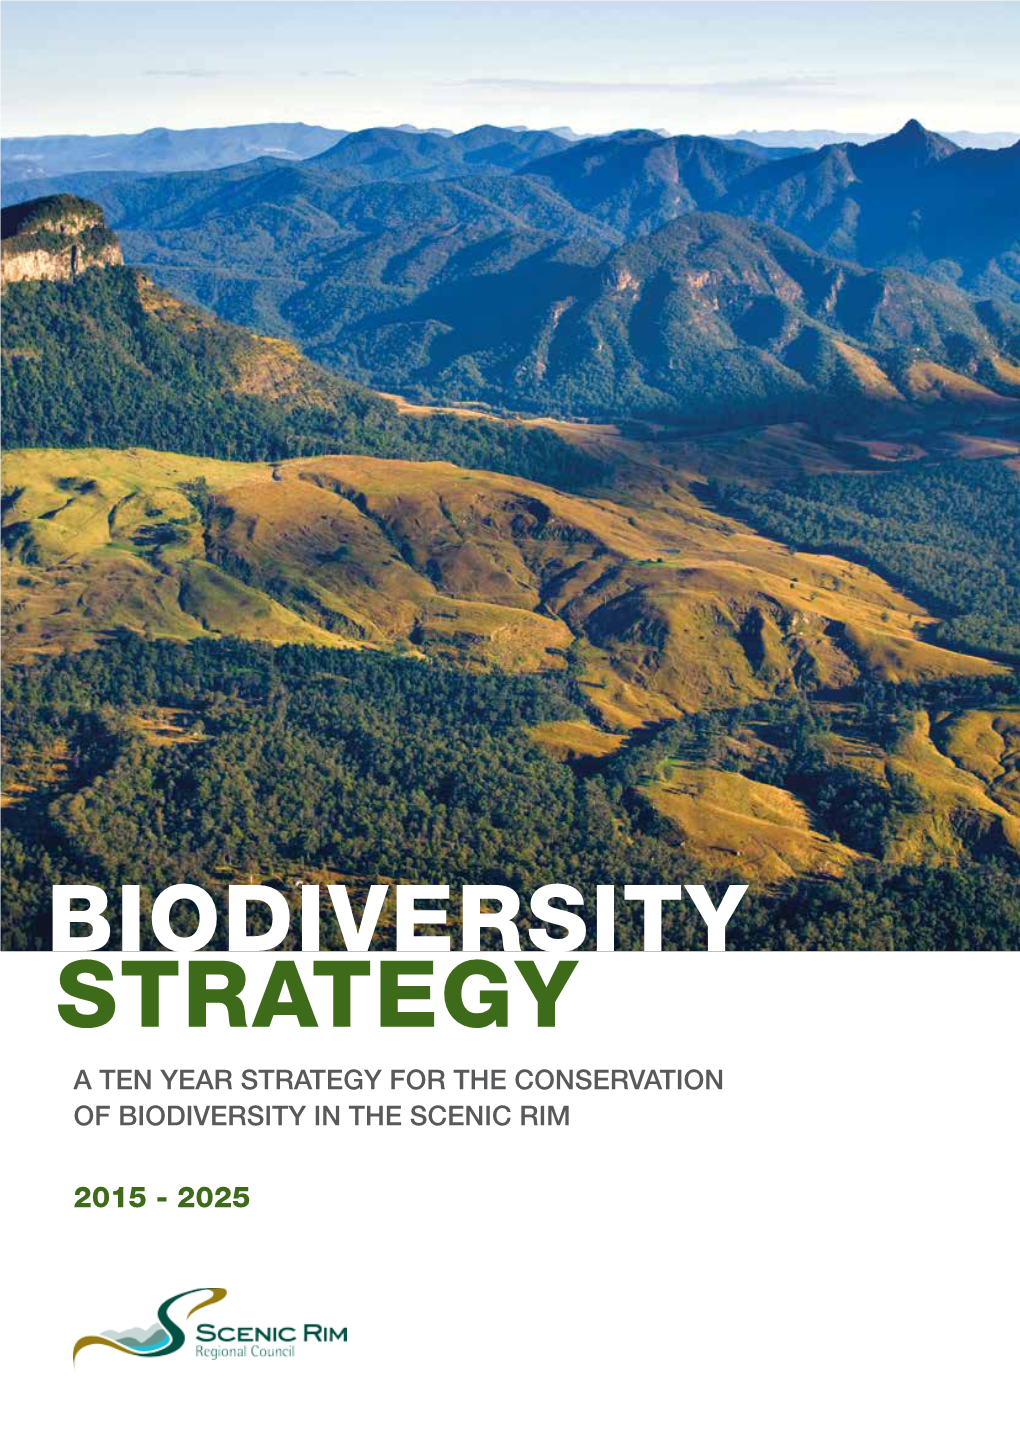 Biodiversity Strategy a Ten Year Strategy for the Conservation of Biodiversity in the Scenic Rim